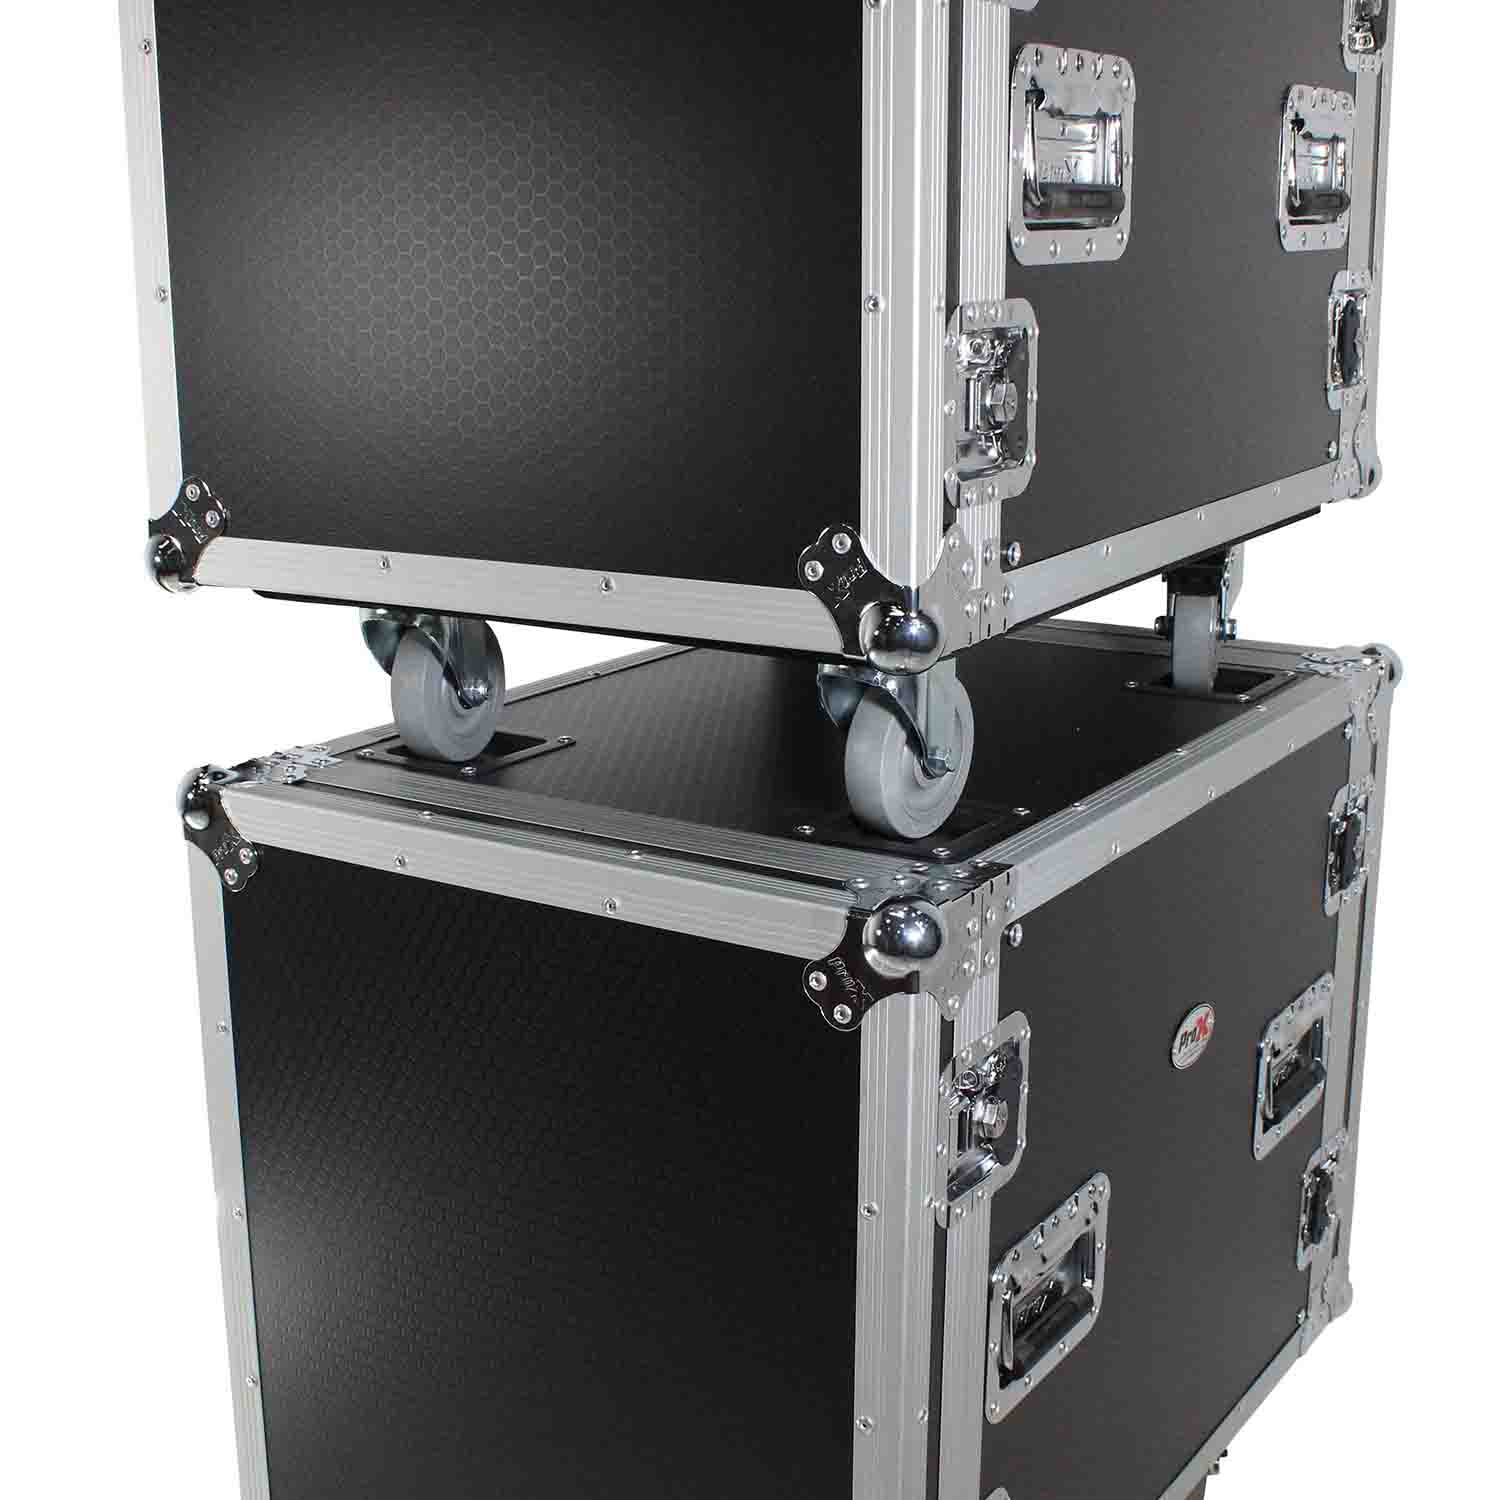 ProX T-18RSS24WDST, 18U Space Amp Rack Mount ATA Flight Case 24 Inch Depth W-Casters - Hollywood DJ